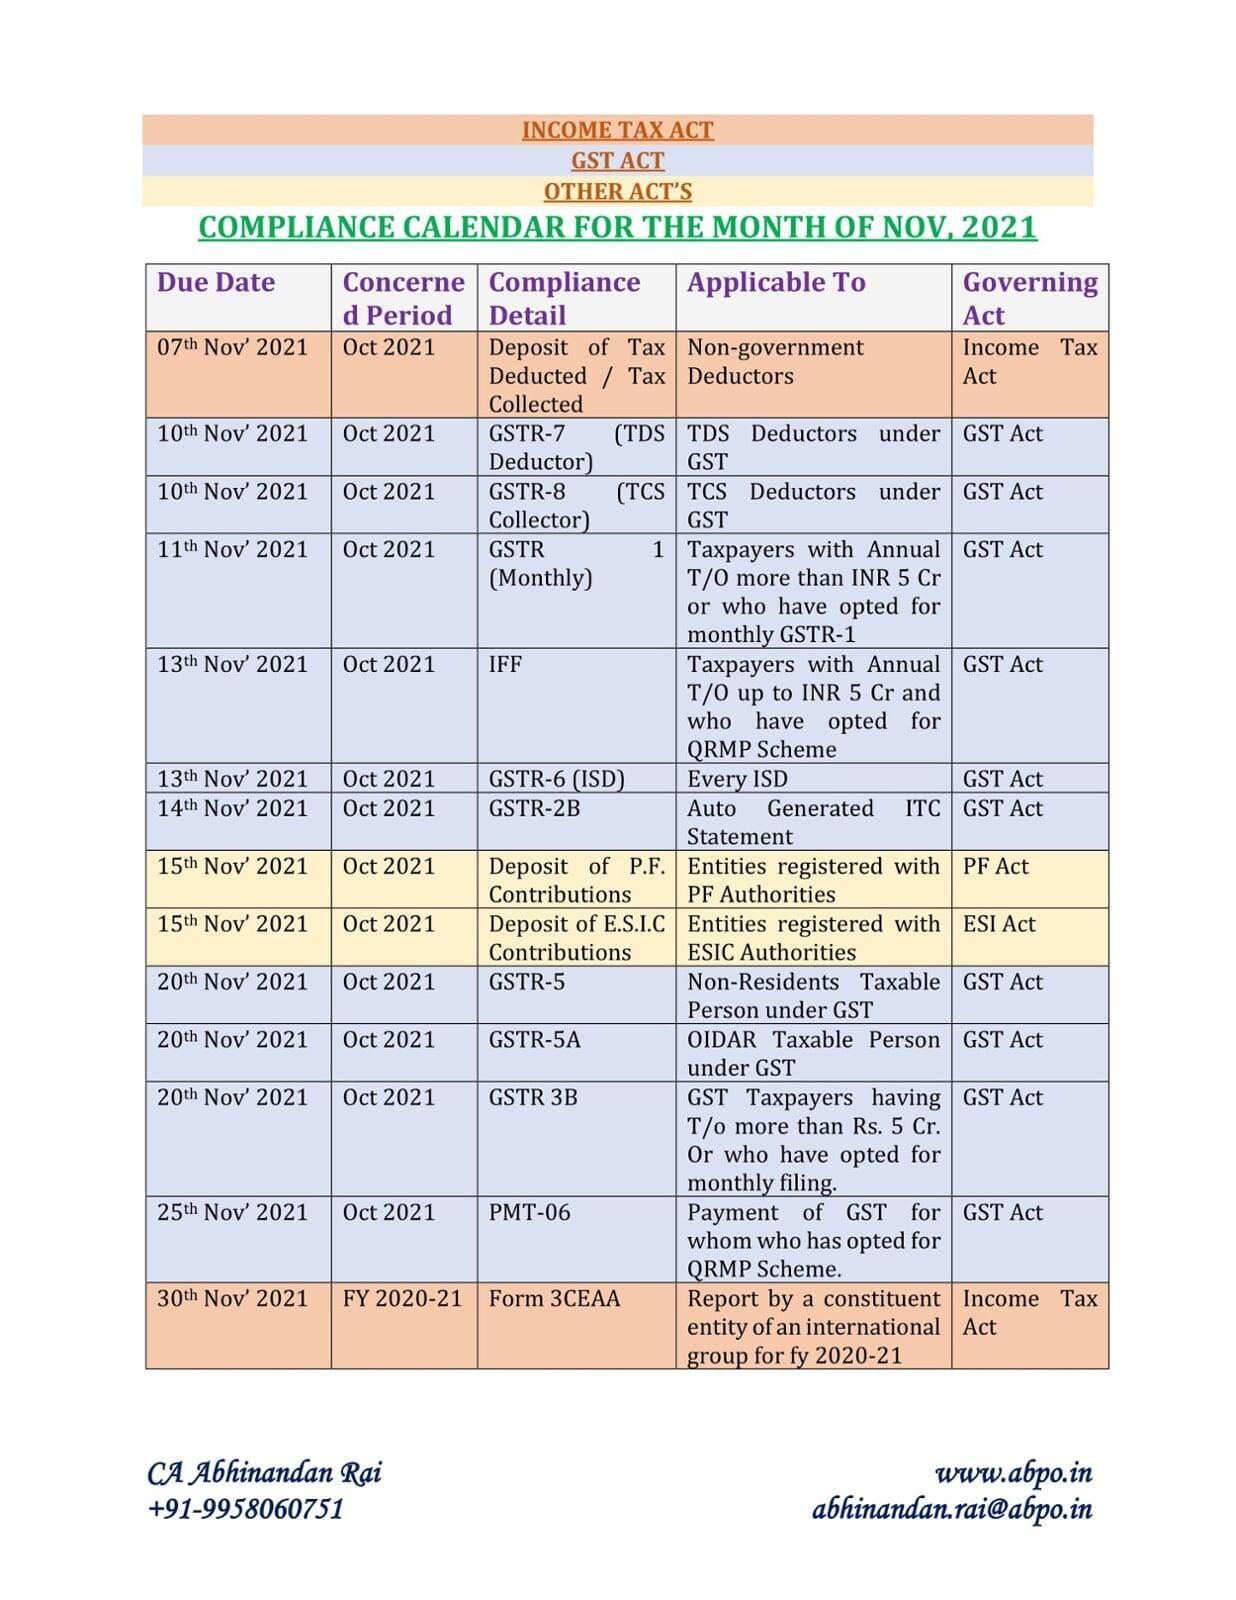 COMPLIANCE or DUE DATE CALENDAR FOR THE MONTH OF NOVEMBER 2021